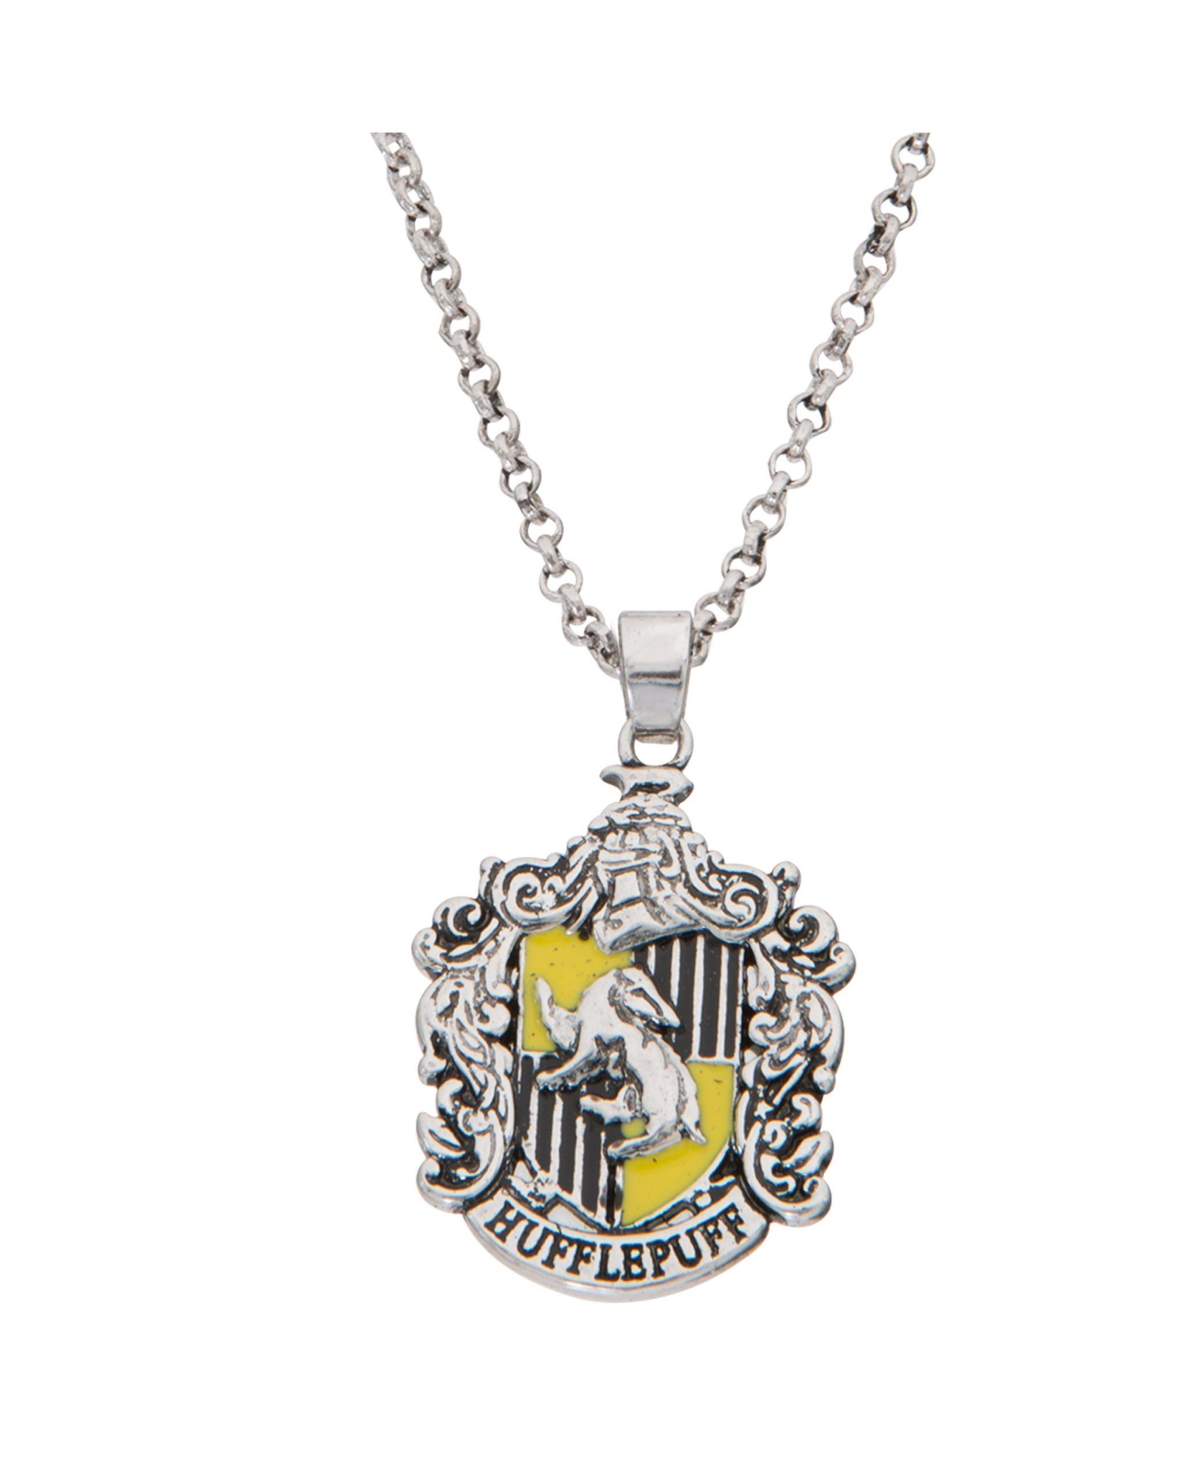 Womens Silver Plated House Pendant, Hufflepuff - 16 + 2'' - Silver tone, yellow